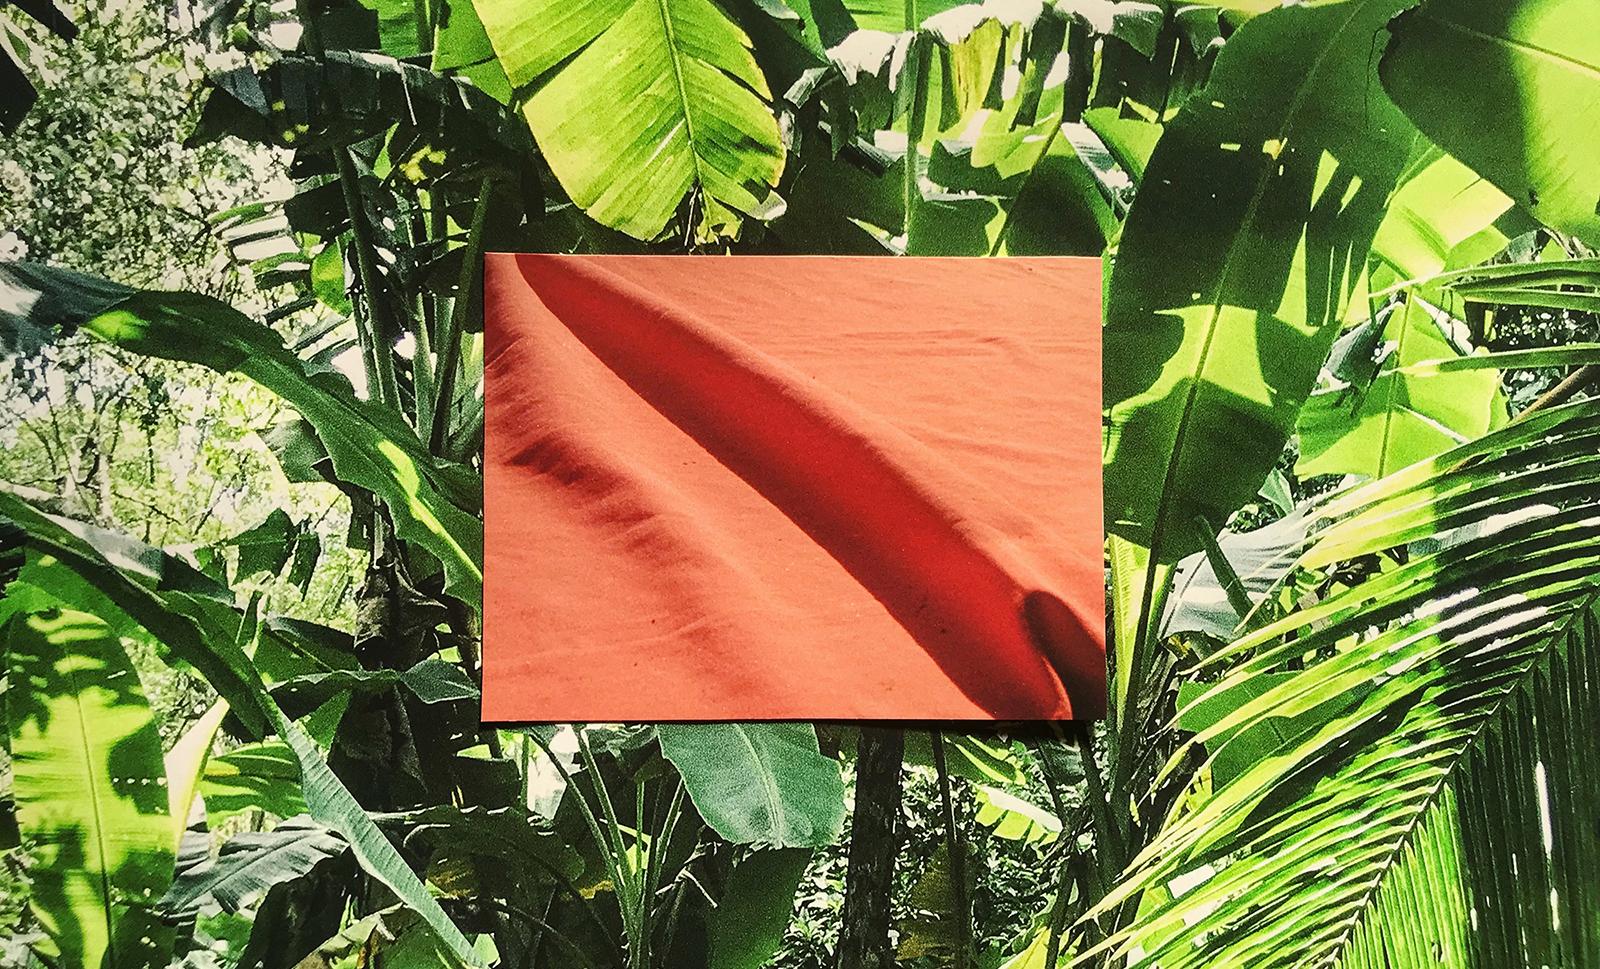 Many lush, green tropical plant leaves with an image of orange fabric overlaid it.